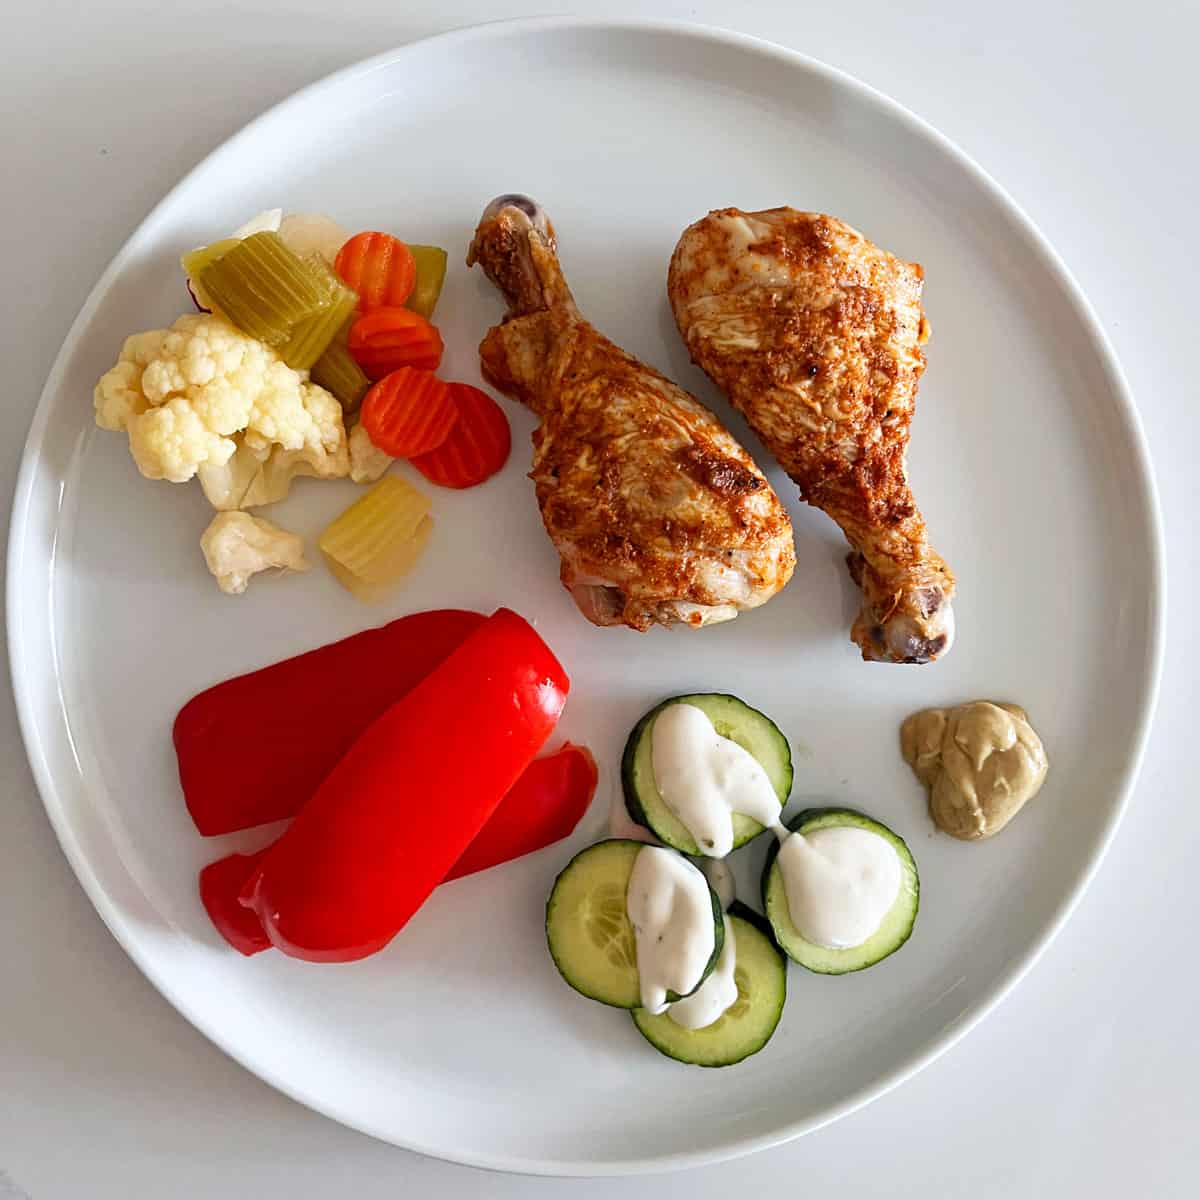 Drumstick leftovers are served with veggies and pickles.